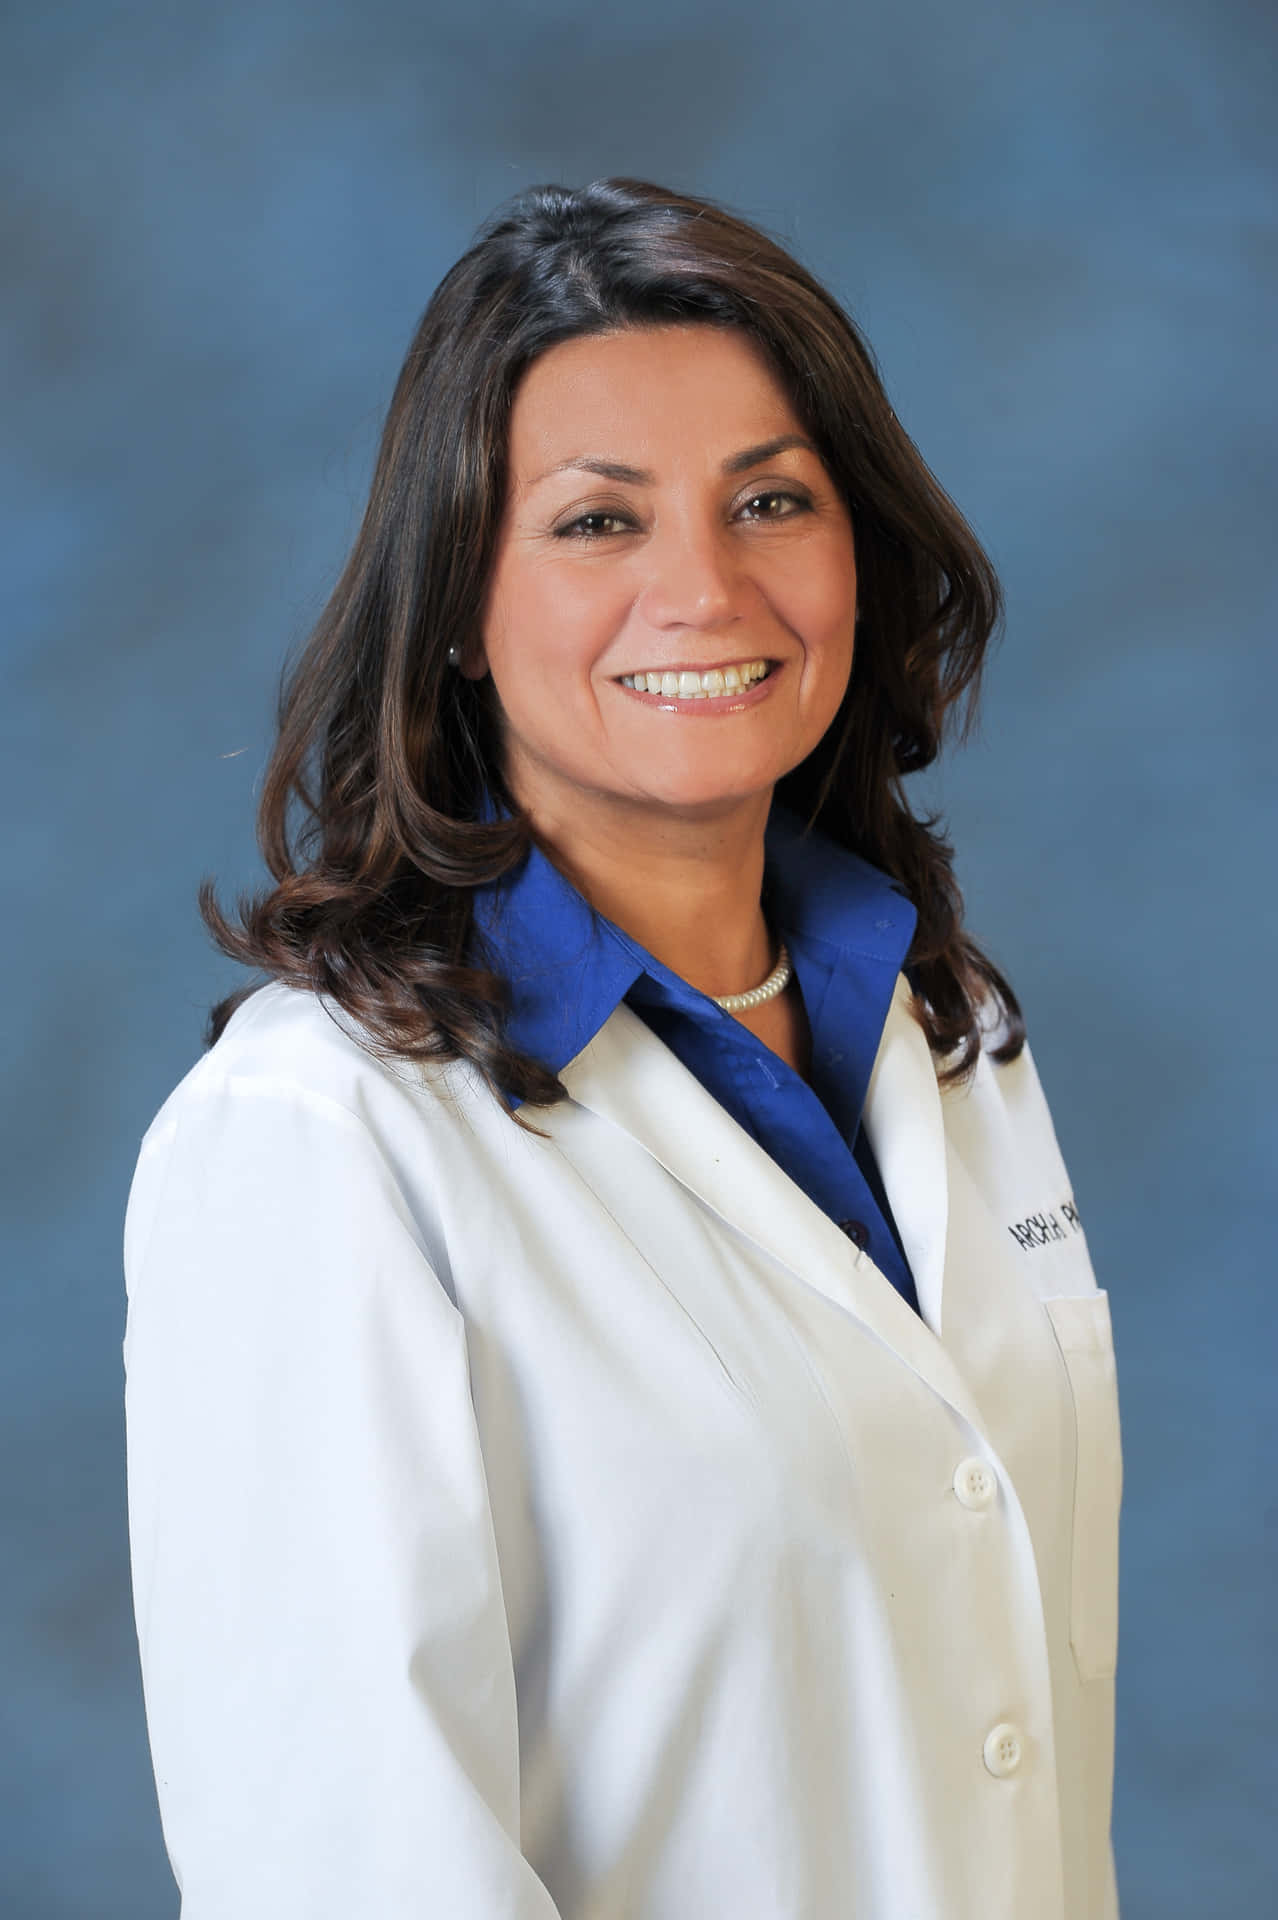 A Woman In A White Lab Coat Smiling